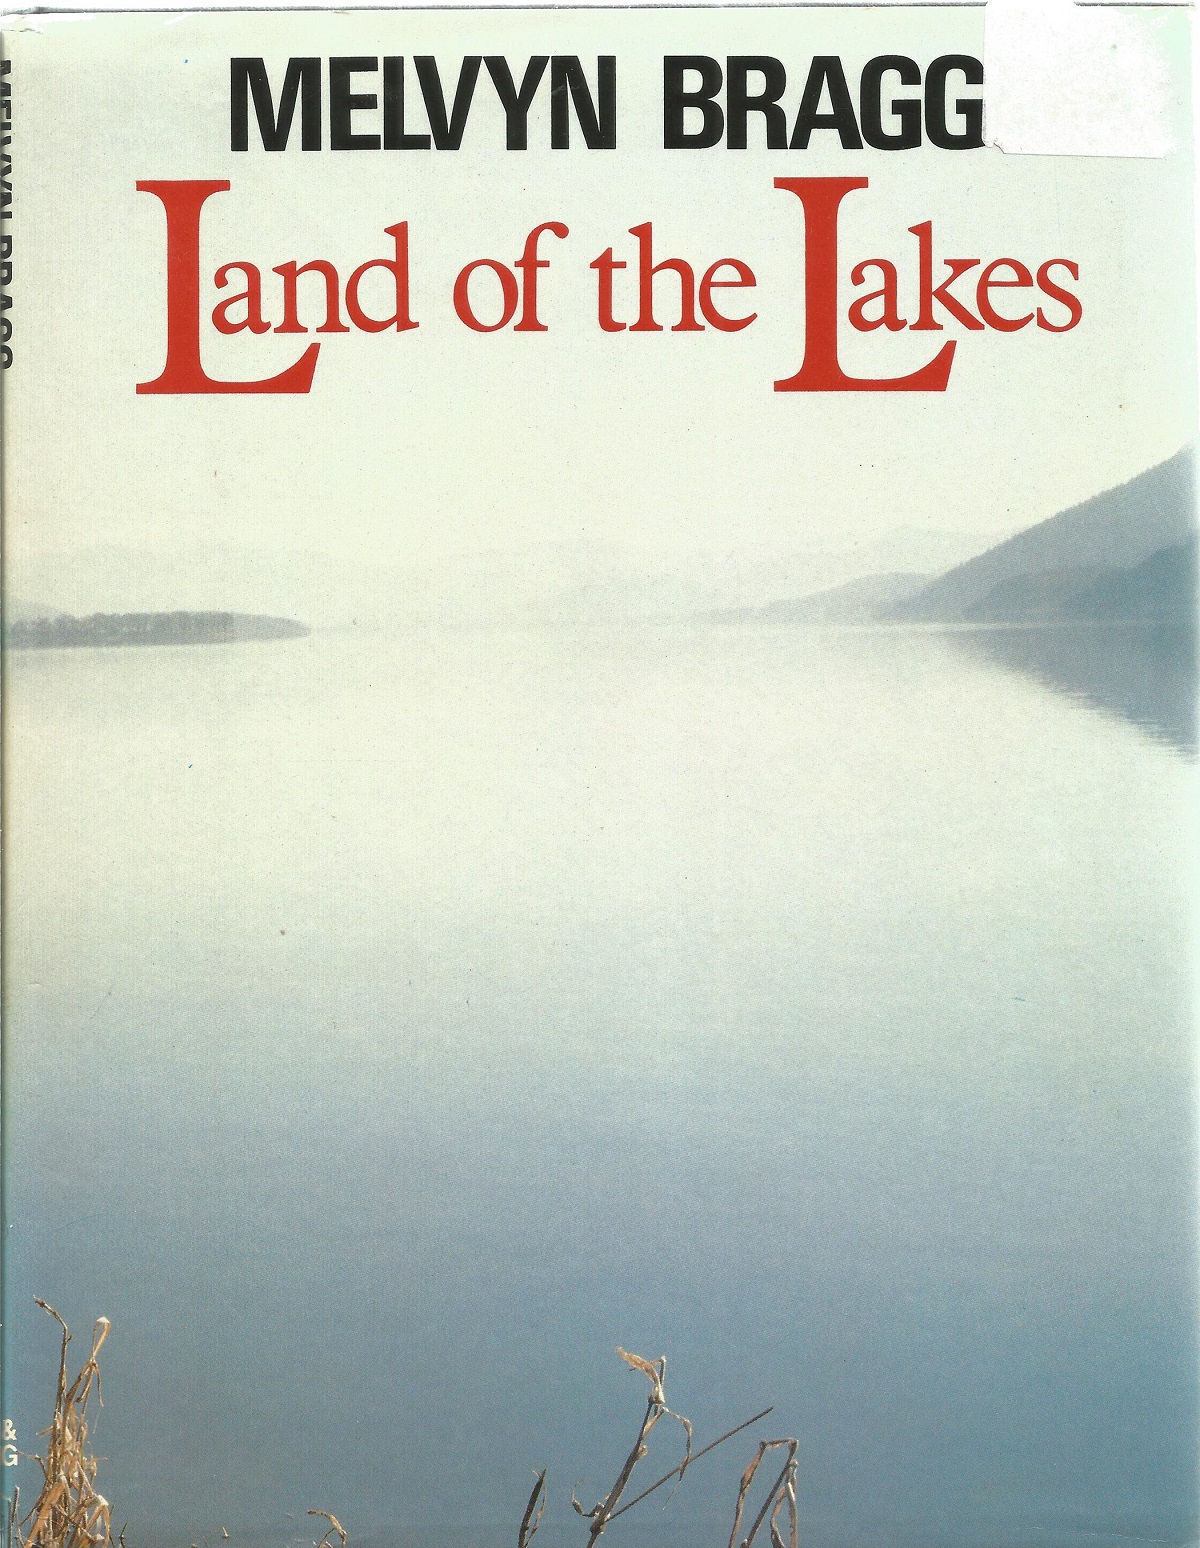 Melvyn Bragg signed hardback book Land of the Lakes. Good condition. All autographs come with a